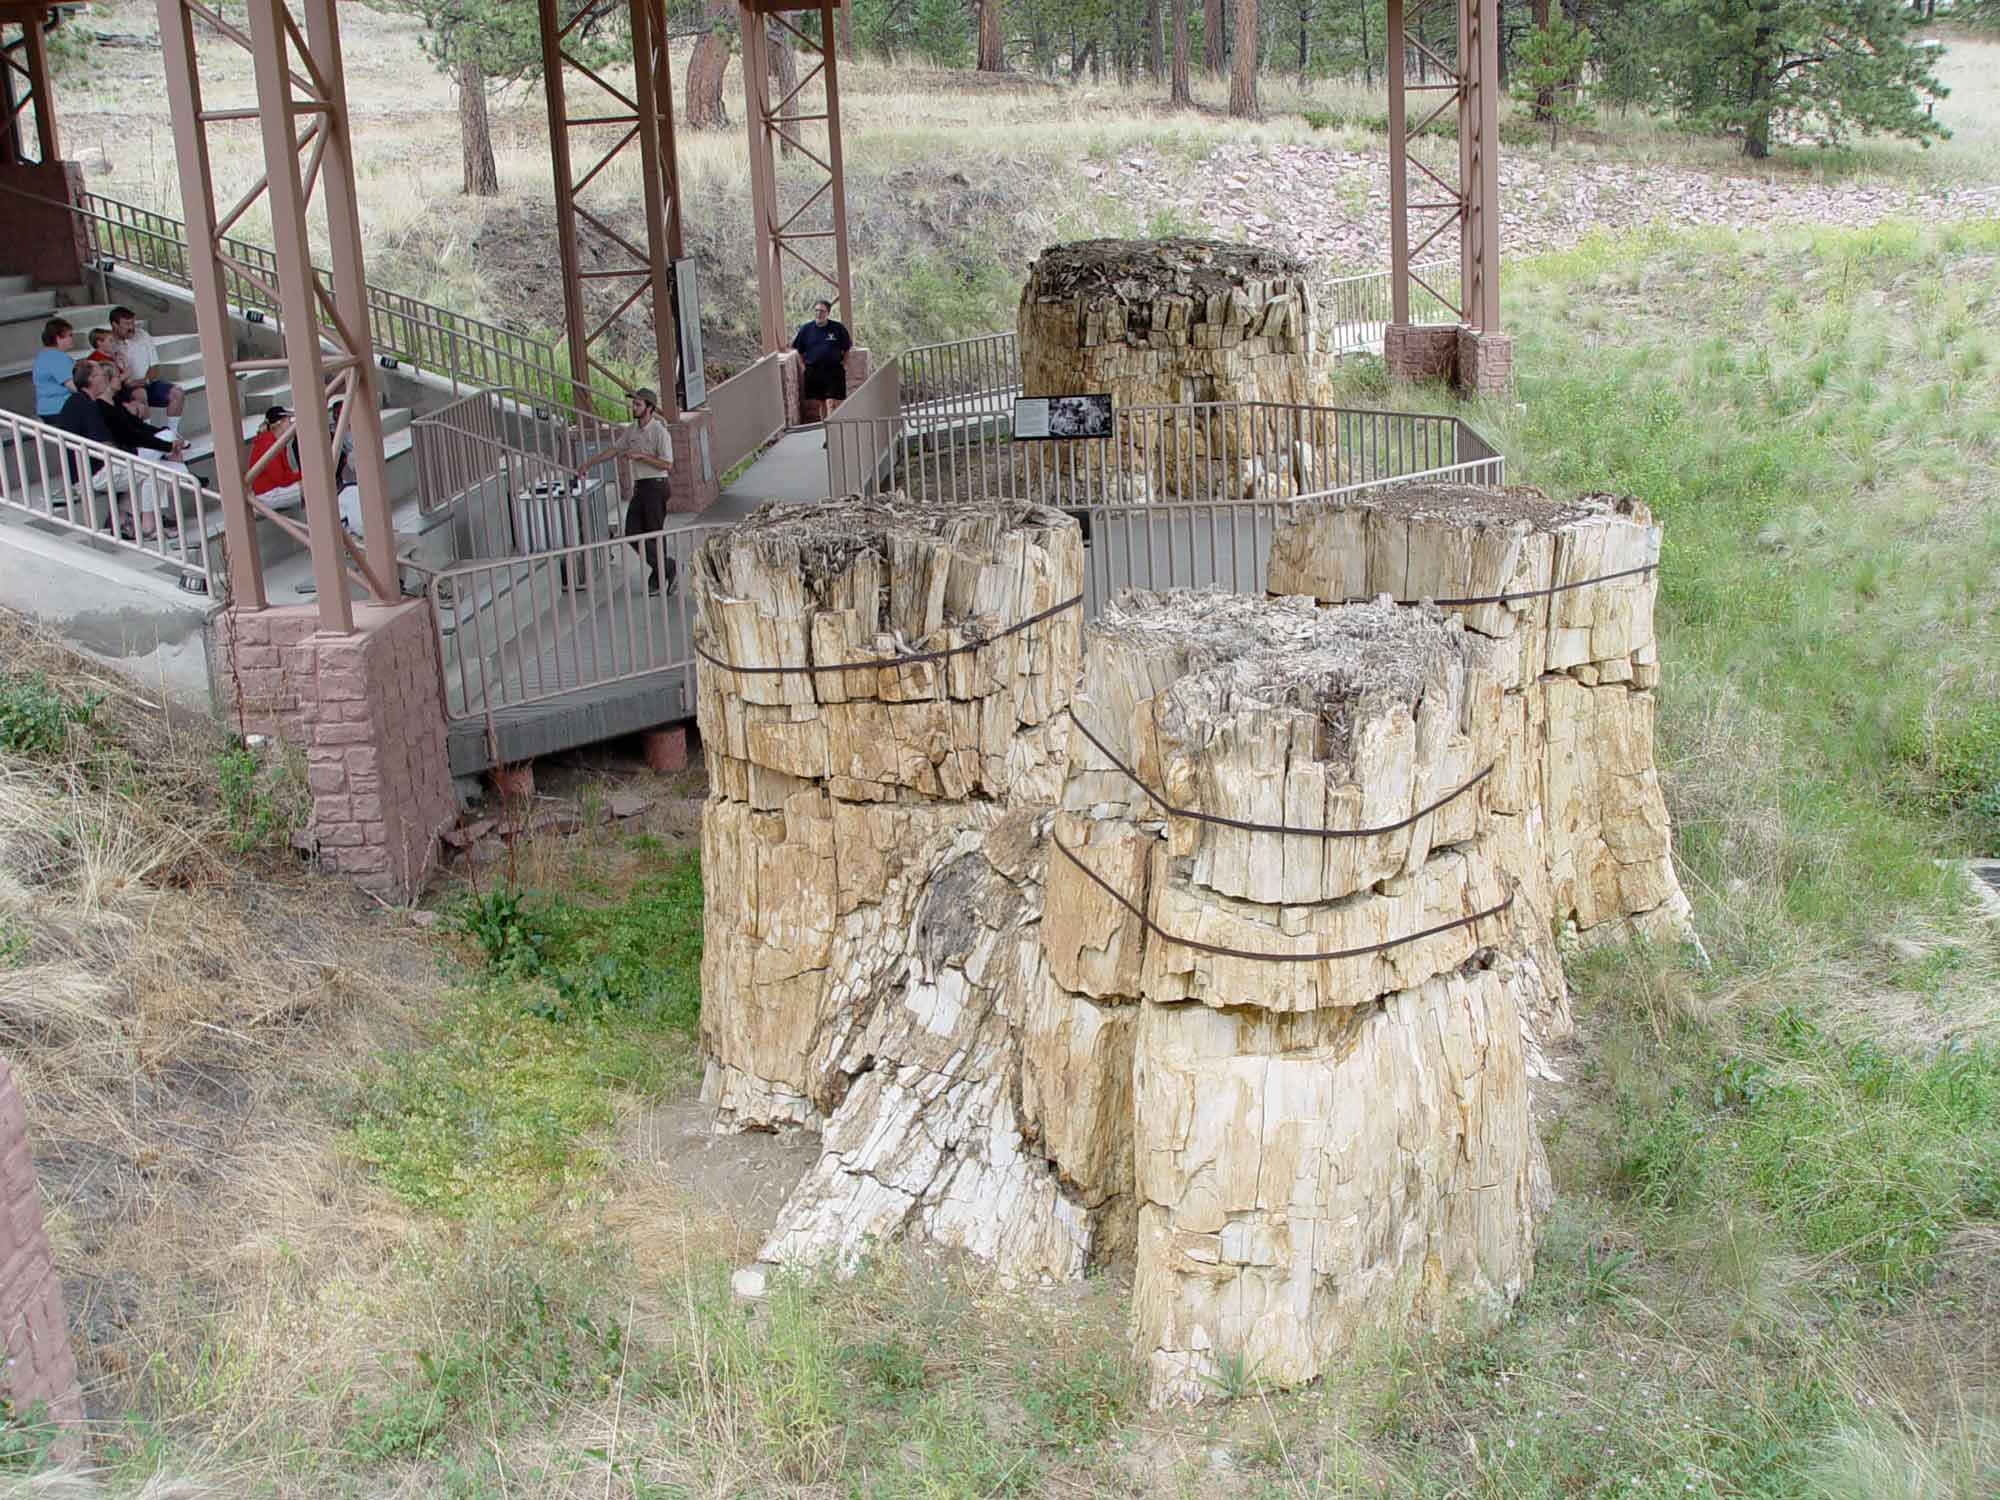 Photograph of a fossilized stump of a redwood tree at Florissant Fossil Beds in Colorado.